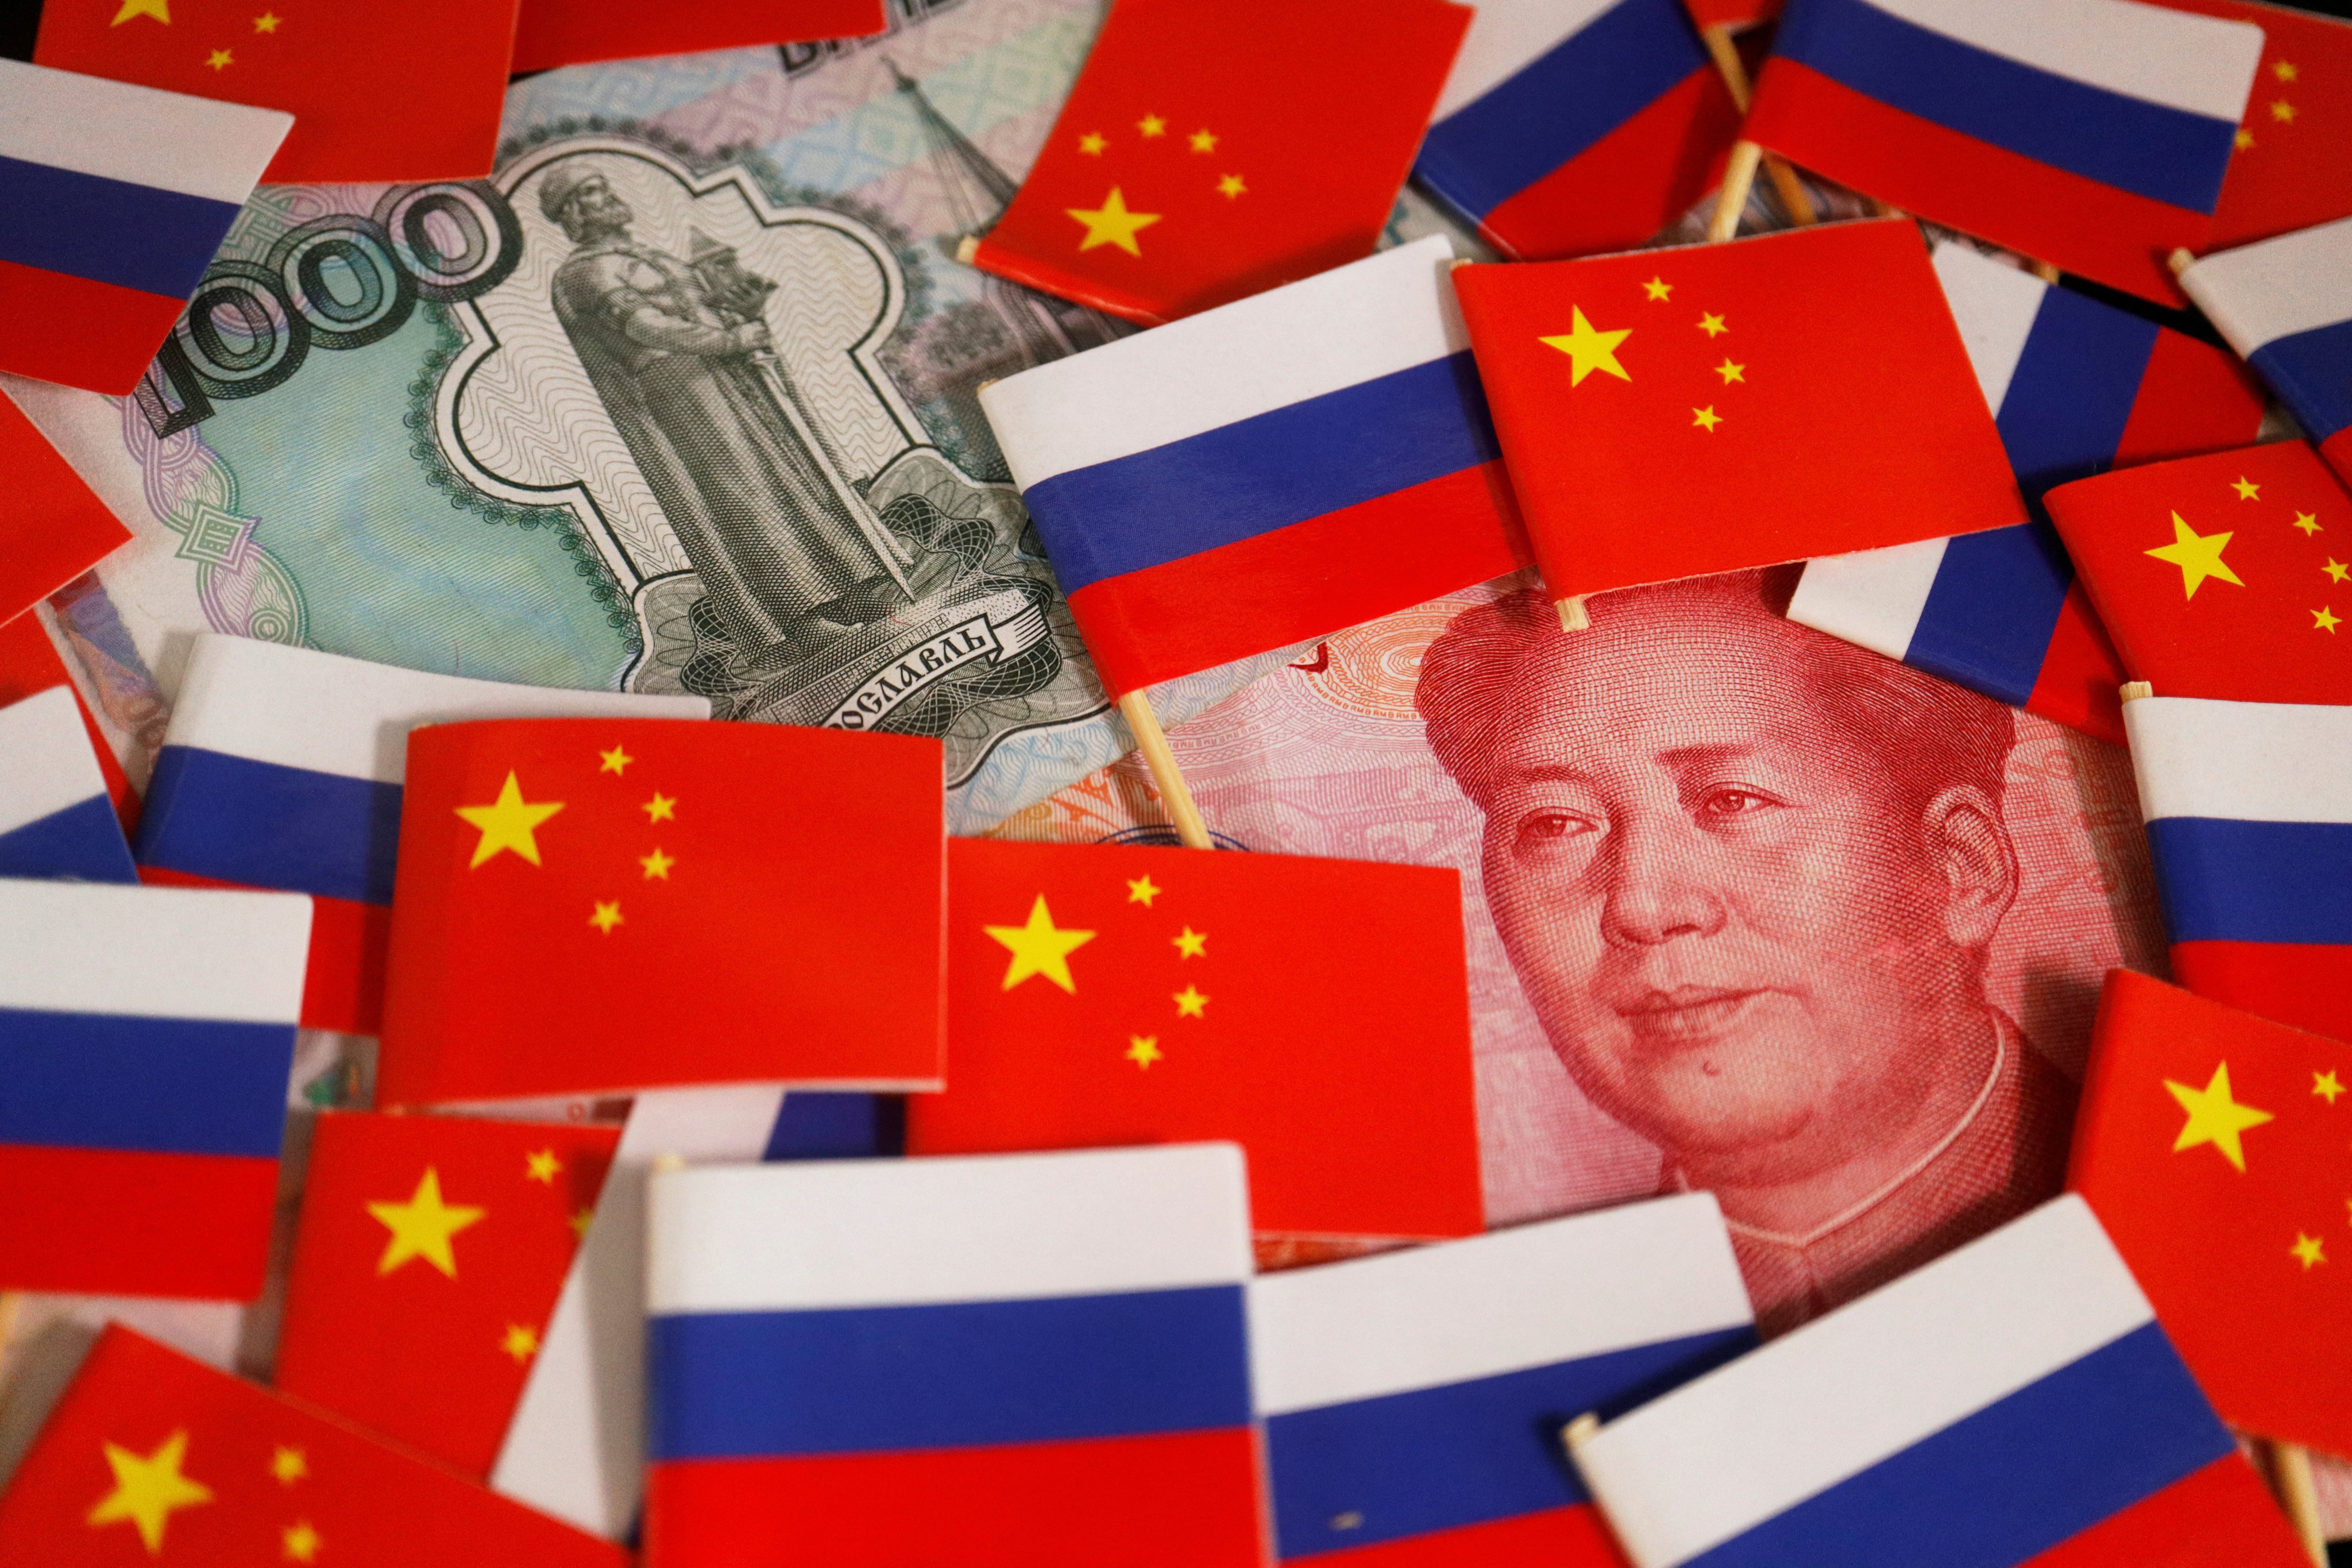 Analysts say cross-border payment deals between China and Russia would probably rely on the yuan. Photo: Reuters